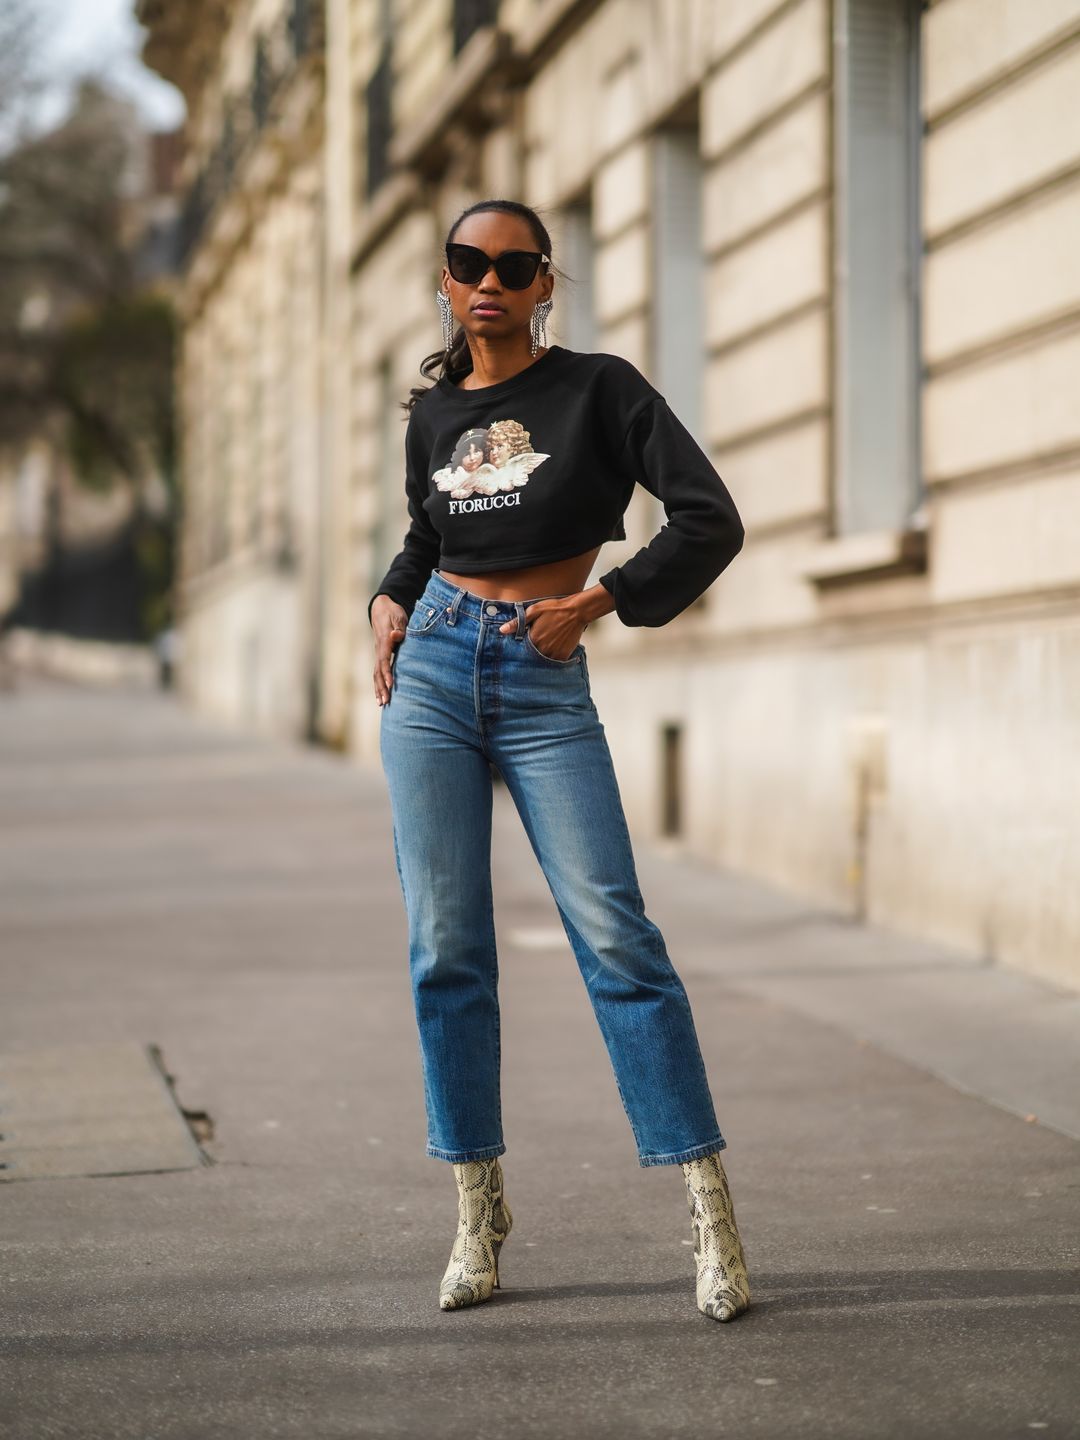 'Jeans and a nice top': 10 outfit ideas to inspire you | HELLO!